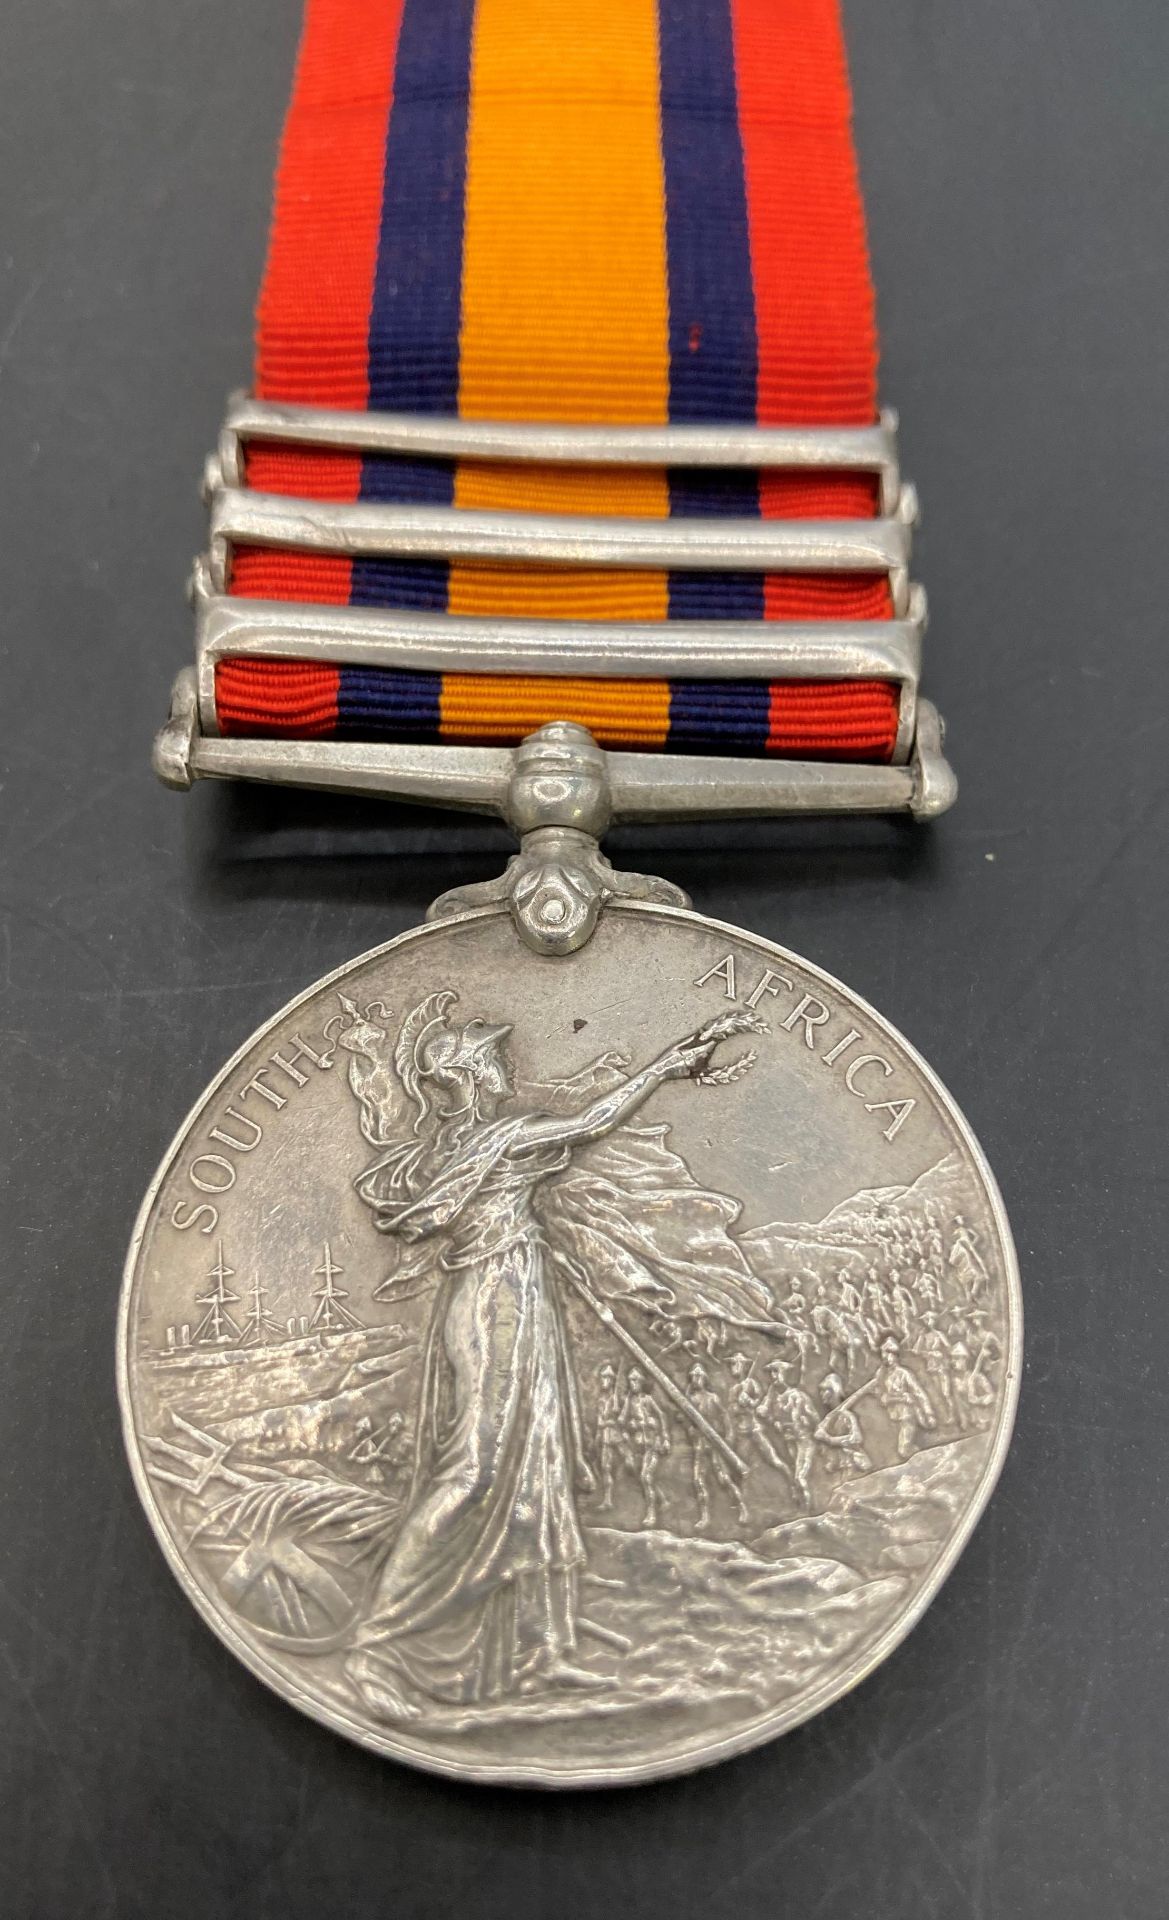 Queens South Africa Medal with clasps for Cape Colony and Orange Free State complete with ribbon to - Image 3 of 4